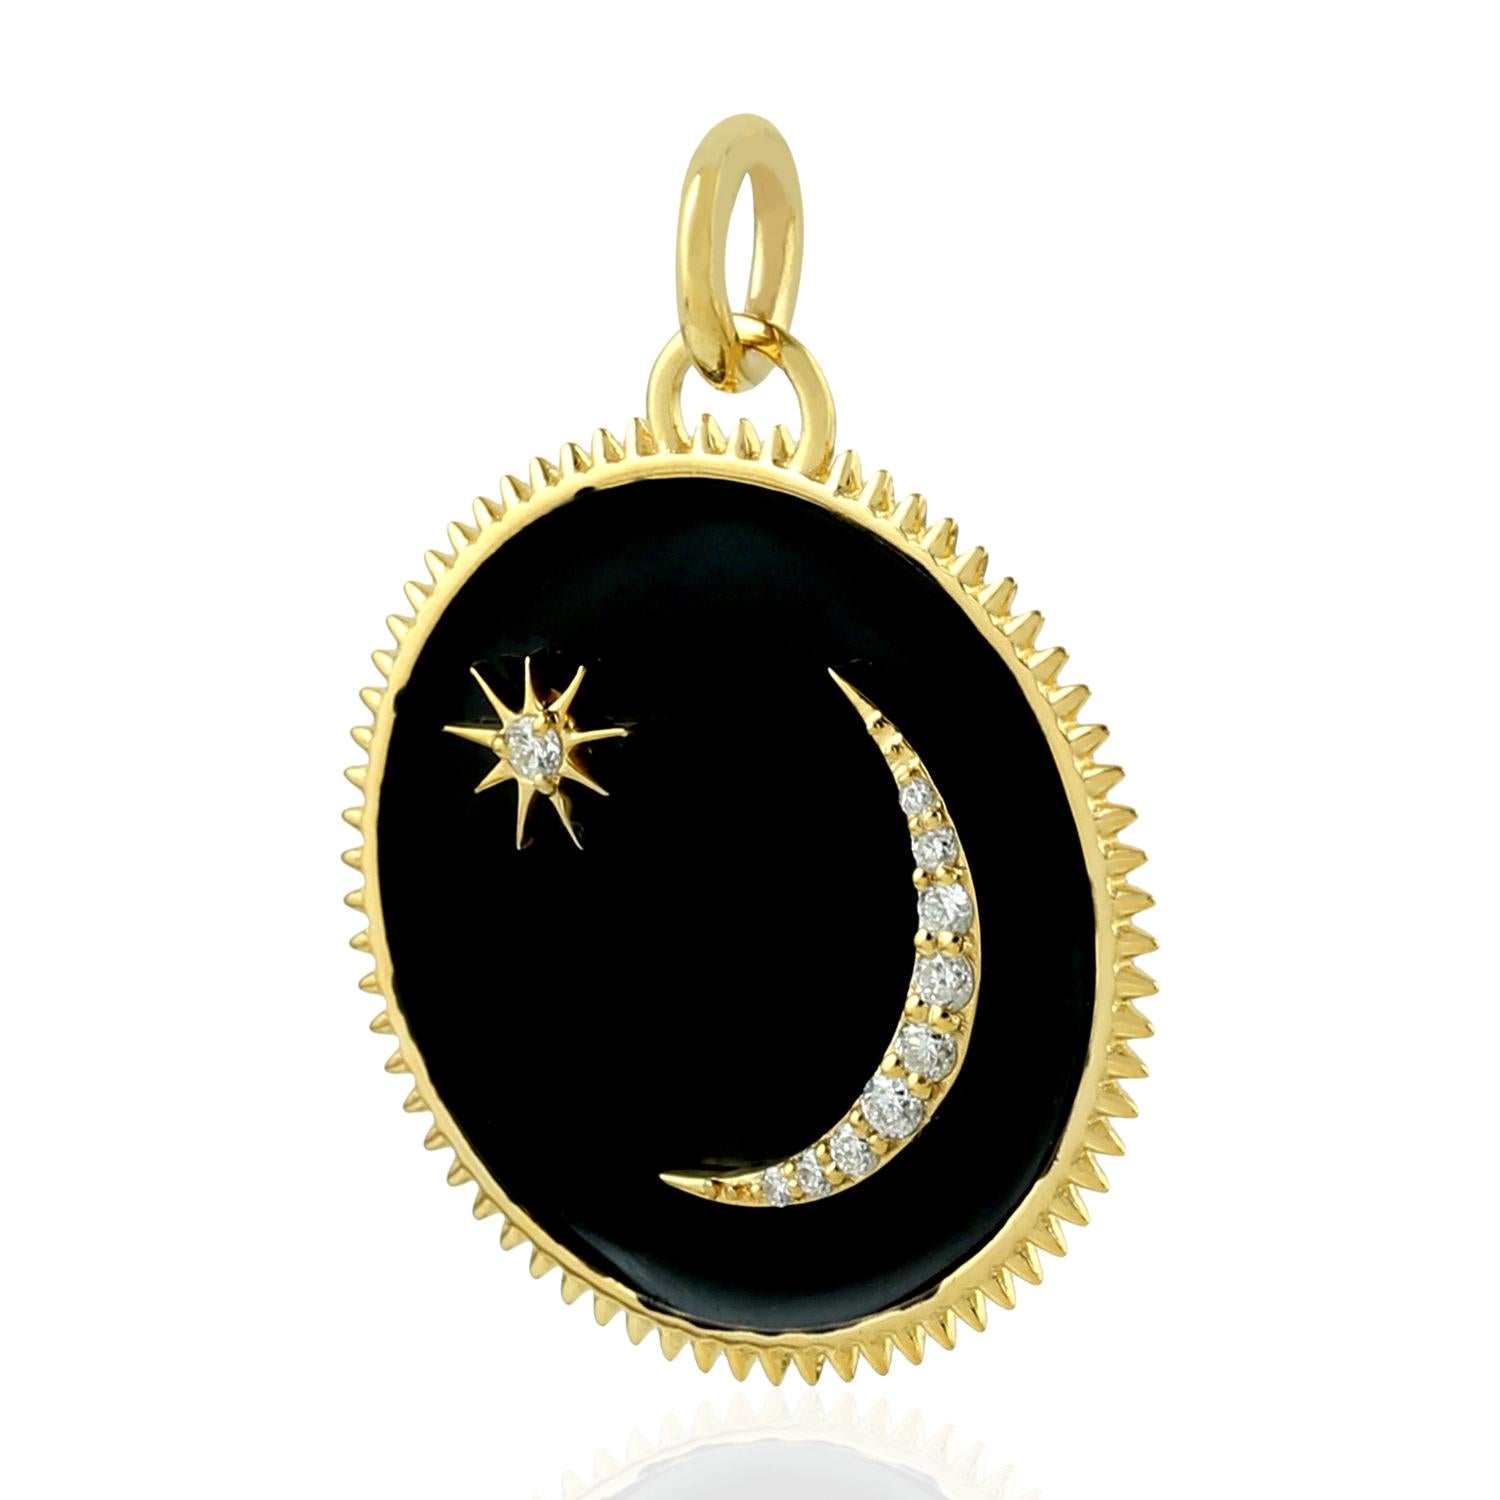 The 14 karat gold pendant medallion is set with black enamel and .11 carats of shimmering diamonds.  This medallion represents learning each day and growing to be a better individual.  Moon signifies peace & tranquility in life.

FOLLOW  MEGHNA